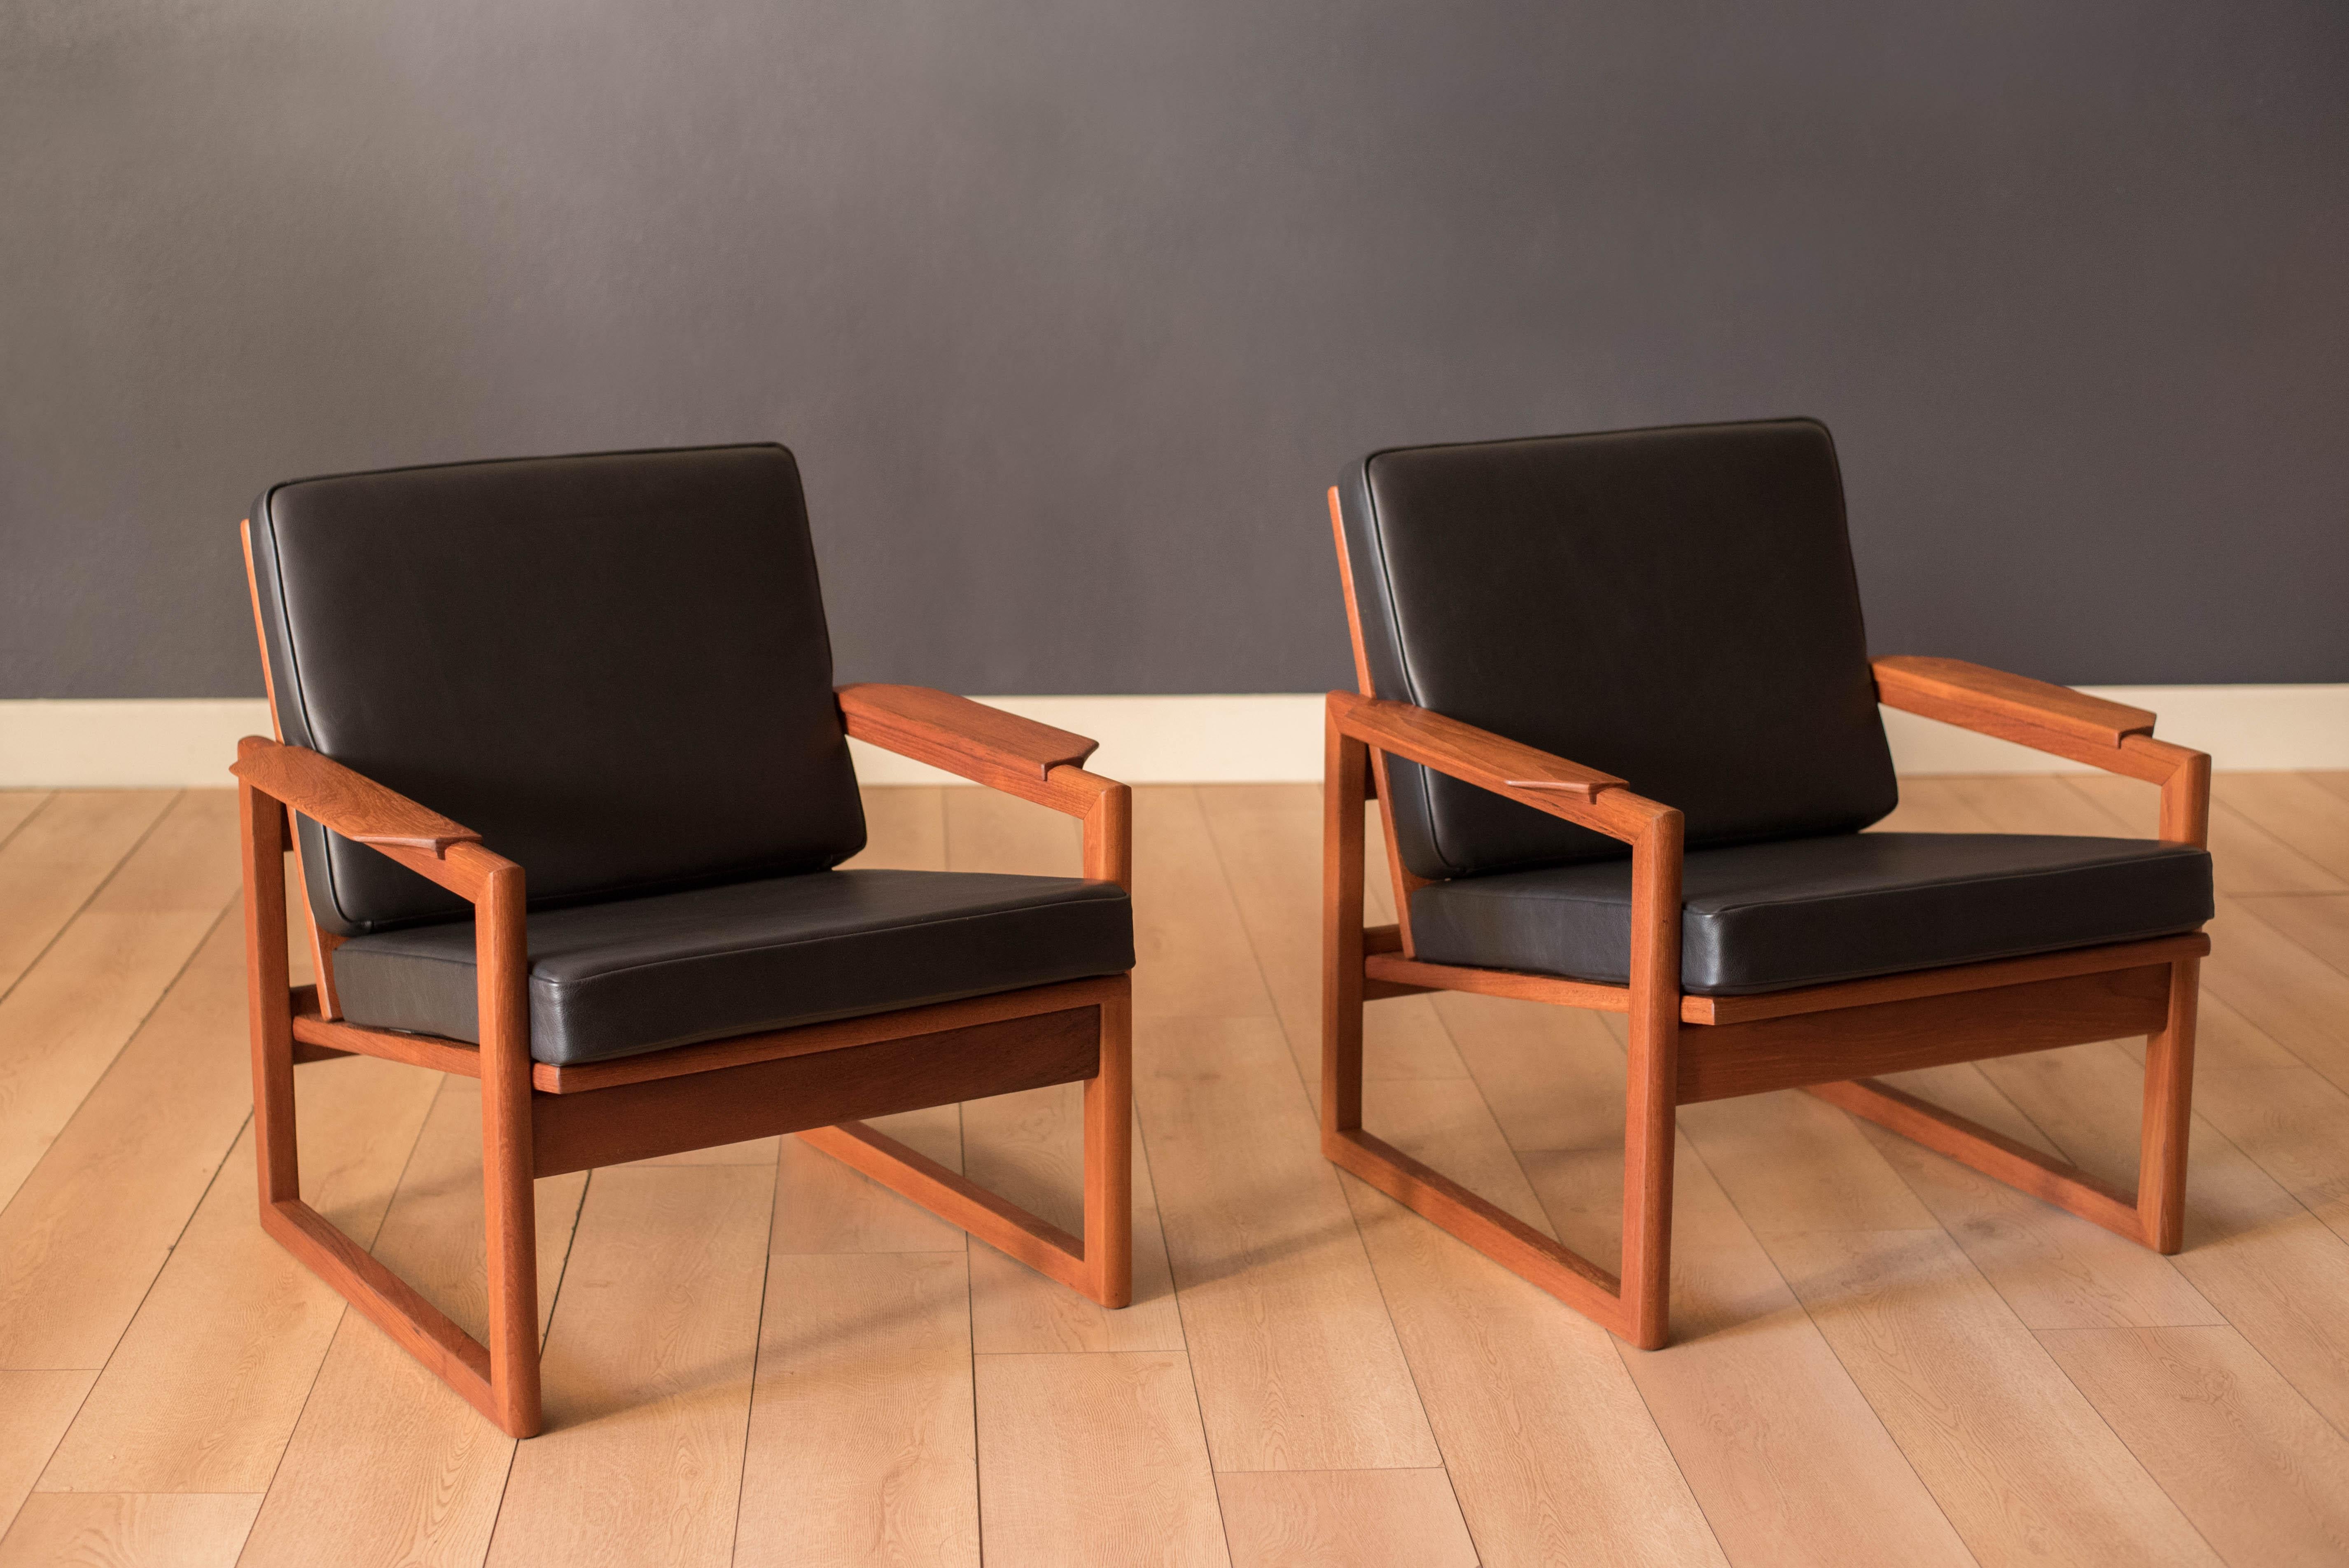 Mid Century Modern pair of lounge chairs in teak designed by Sven Ellekjaer, imported by Selig, Denmark. This set includes brand new wide foam seats in matte black leather. Features sculptural armrests with a slatted backrest support that can be